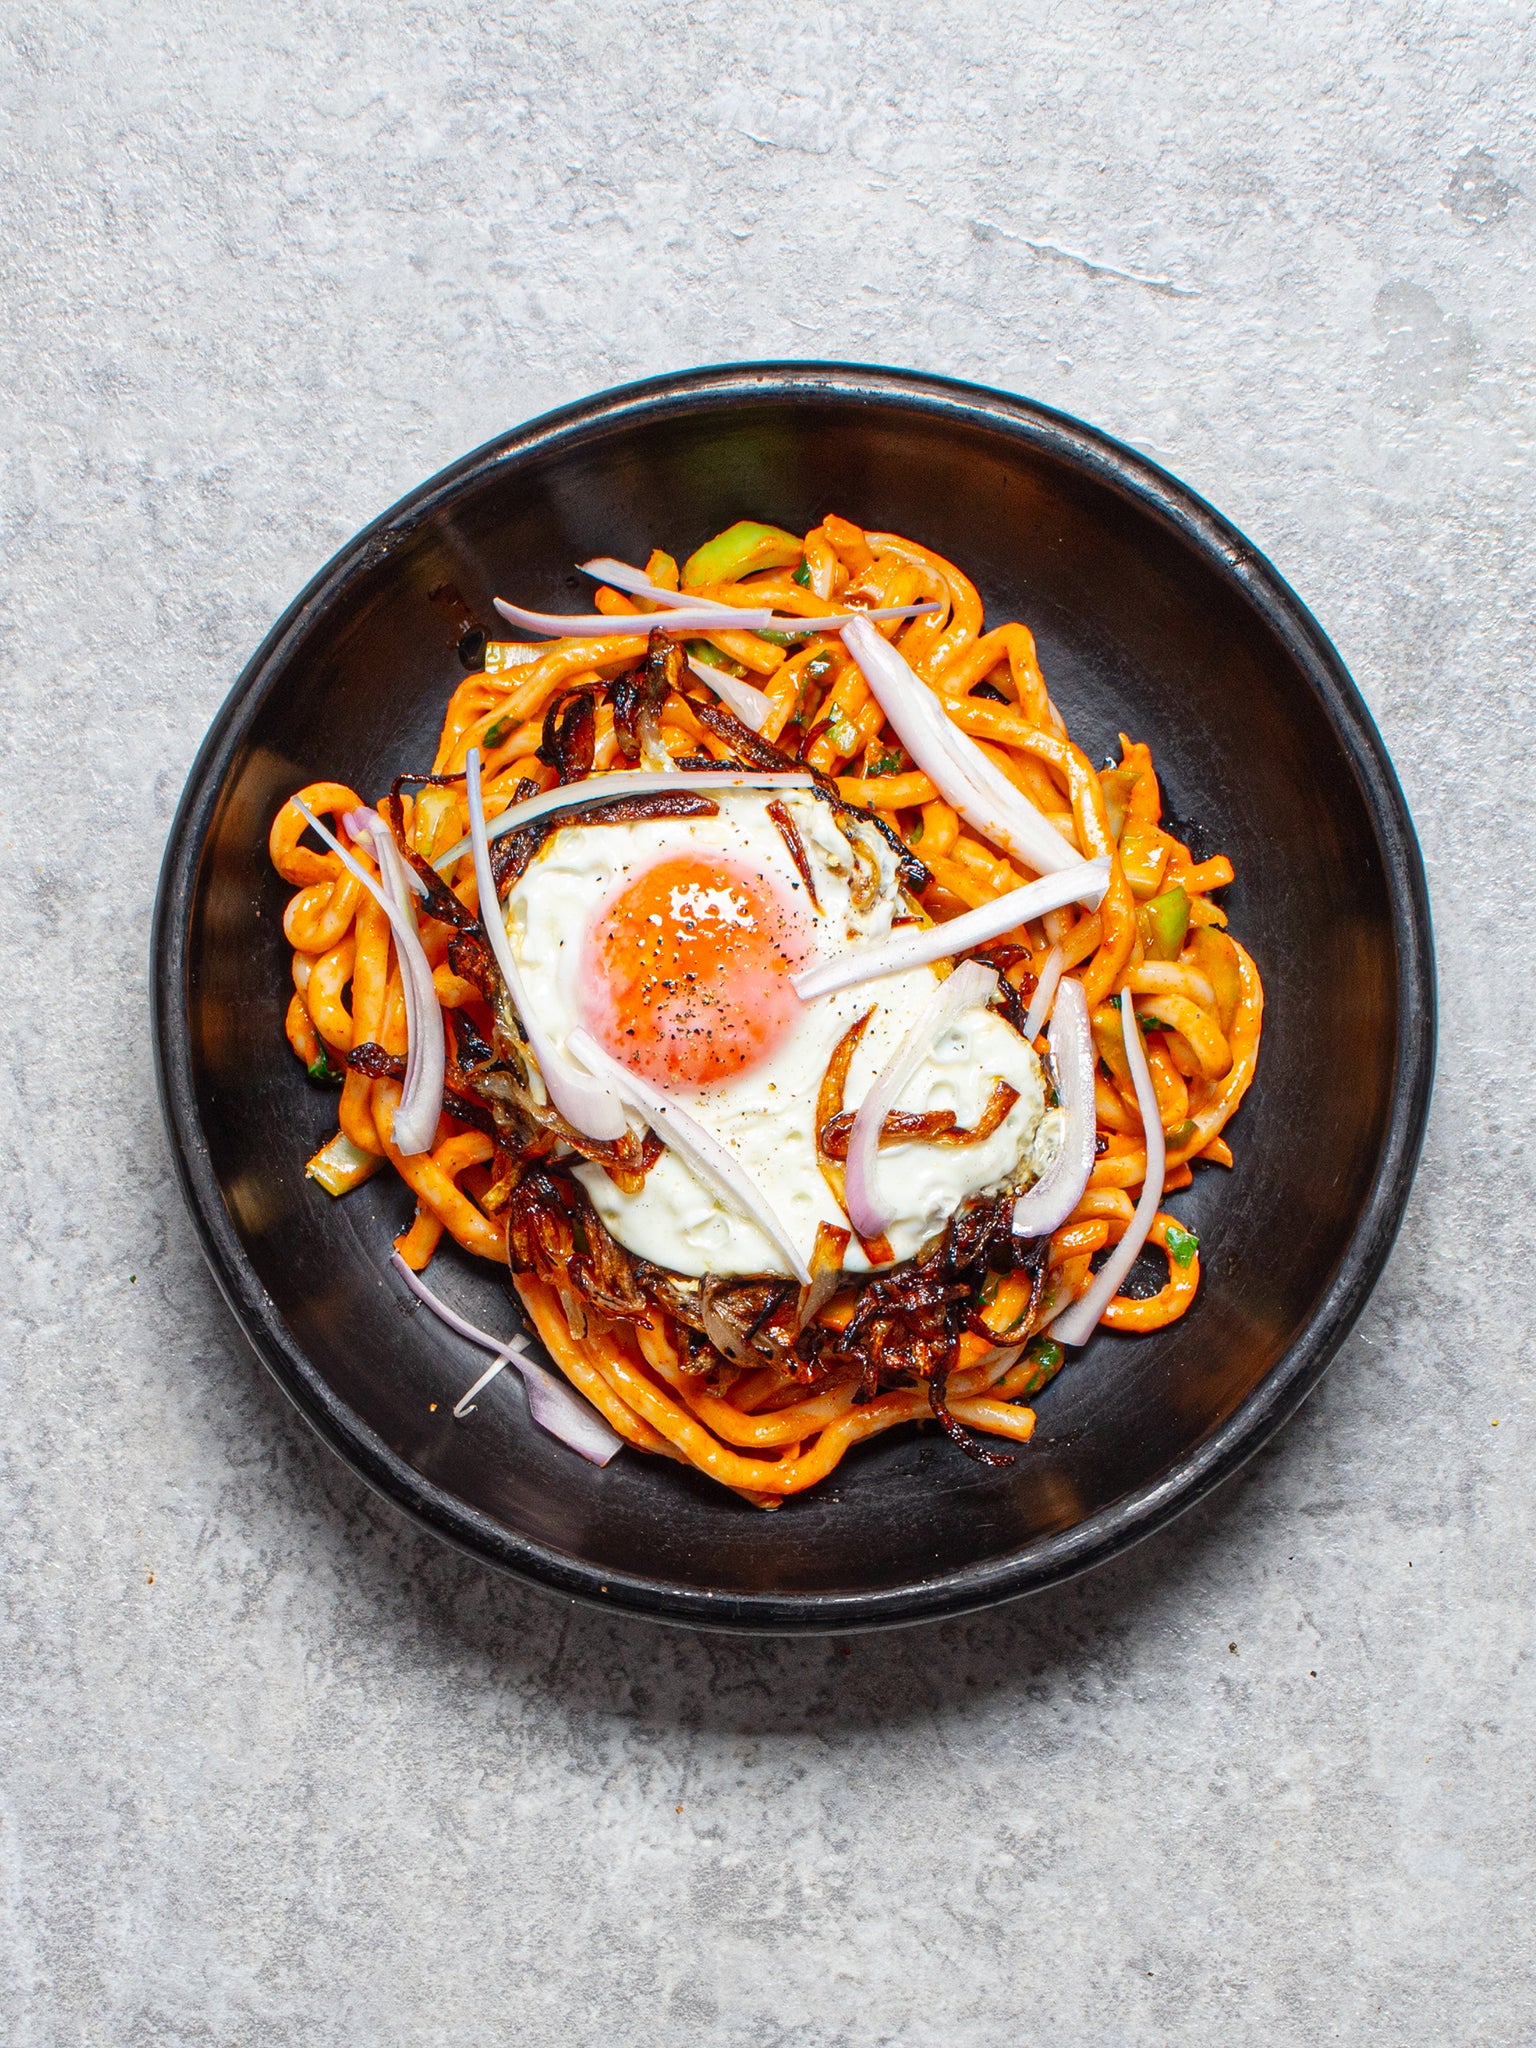 A fried egg with crispy, onion-y edges is the perfect complement to these spicy noodles